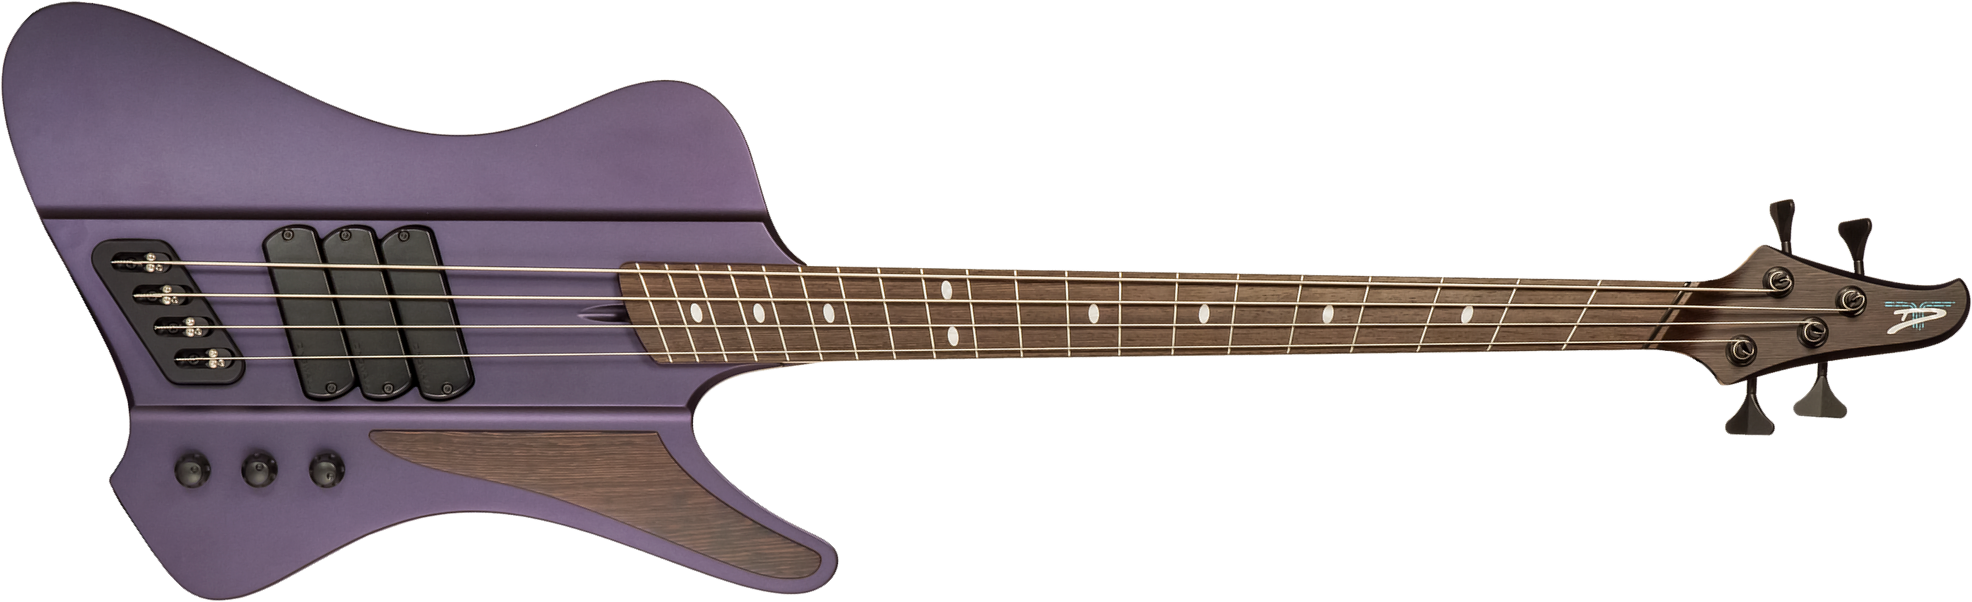 Dingwall Custom Shop D-roc 4c 3-pickups Wen #6982 - Purple To Faded Black - Solidbody E-bass - Main picture